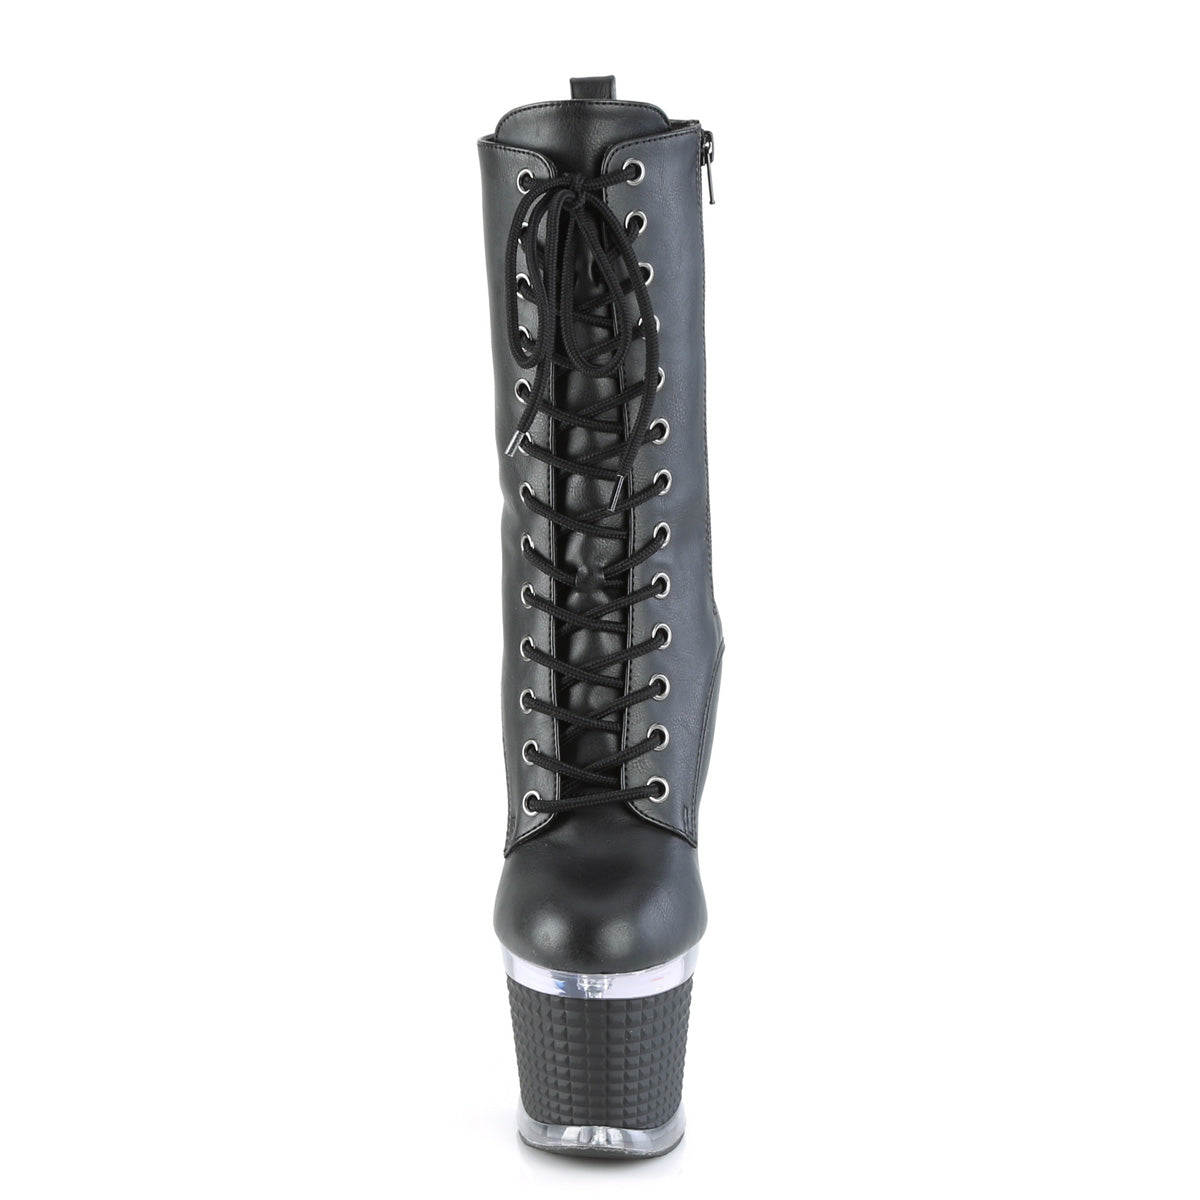 SPECTATOR-1040 Black Faux Leather/Clear Mid-Calf Boot Pleaser